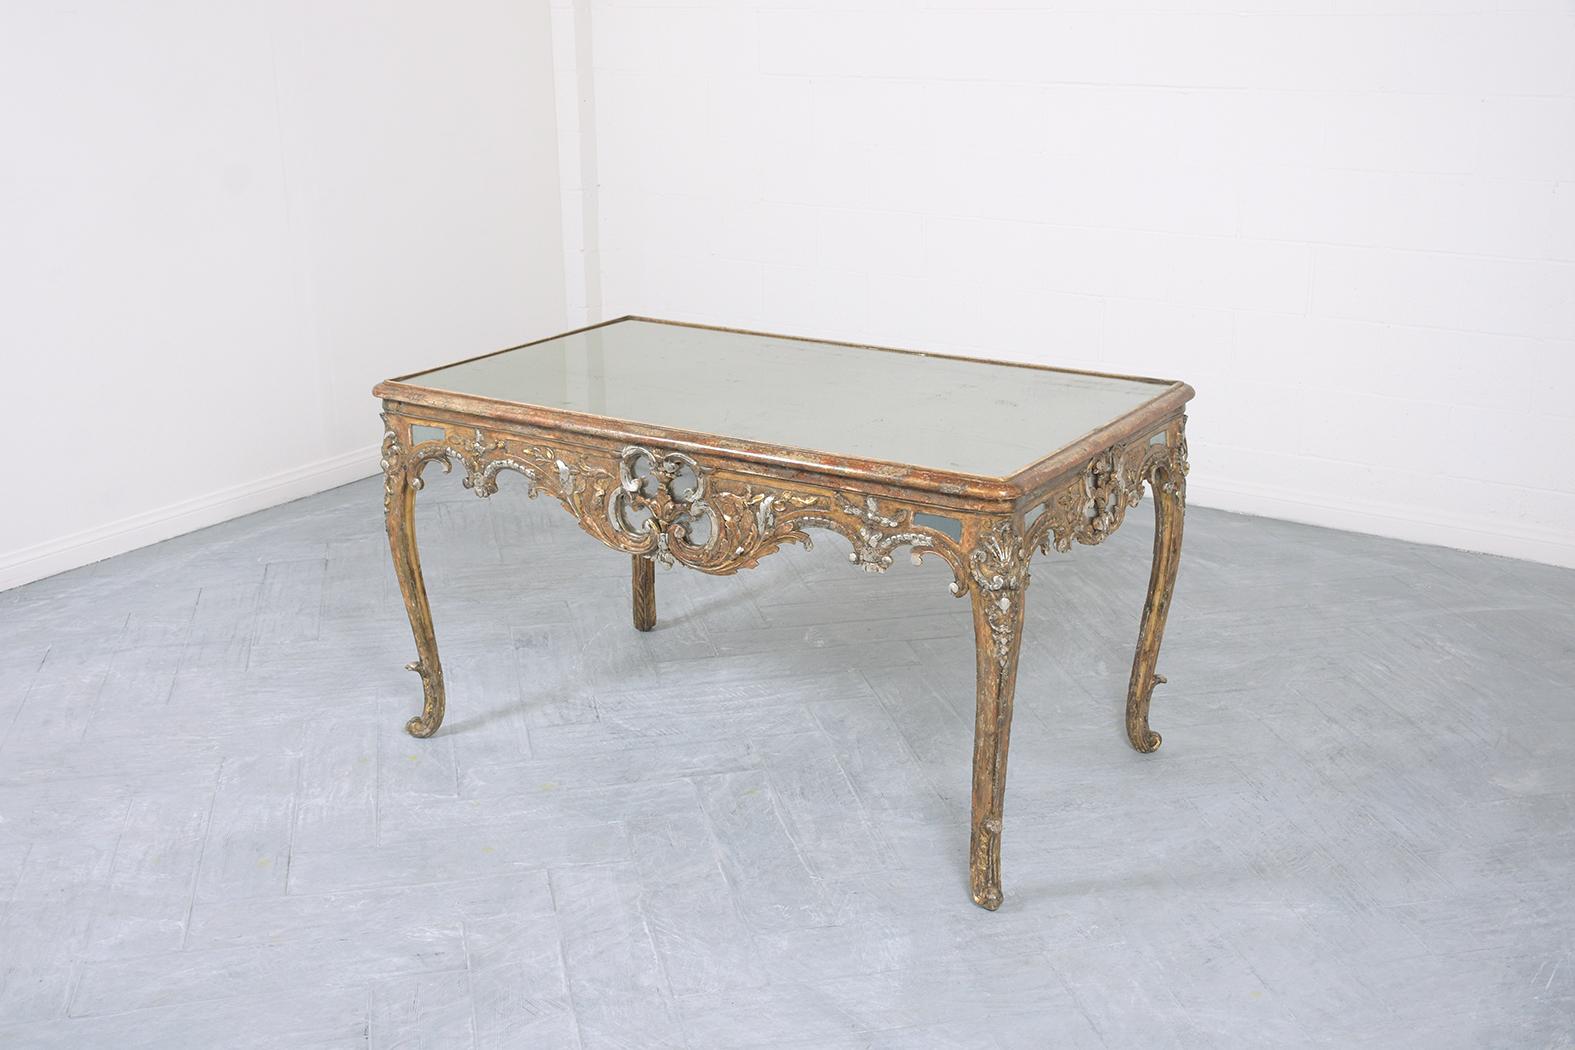 1830s Louis XVI Giltwood Center Table with Vintage Mirrored Top For Sale 2